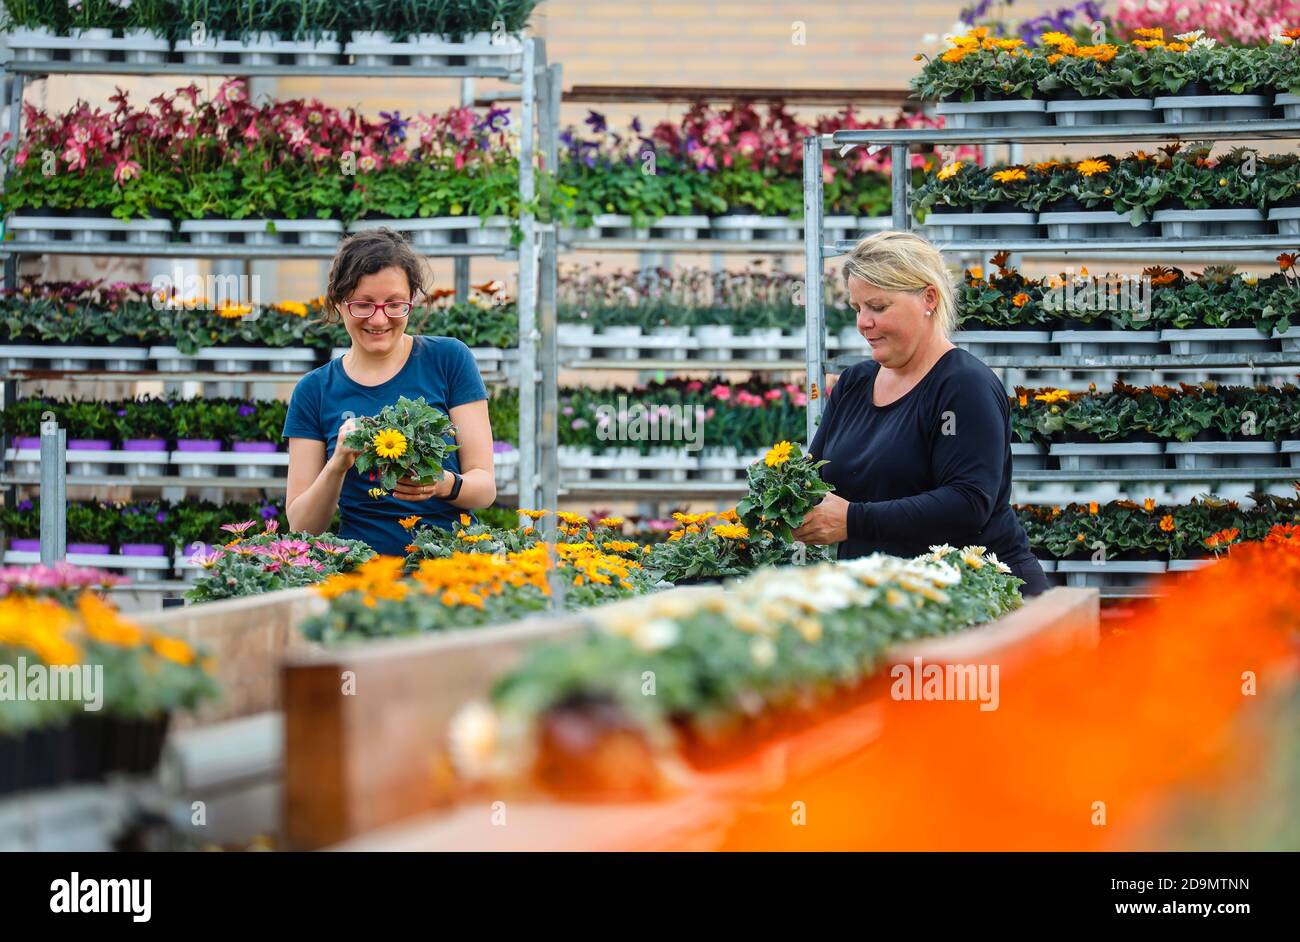 Gardeners in the horticultural business prepare the potted plants for sale, Kempen, Niederrhein, North Rhine-Westphalia, Germany Stock Photo